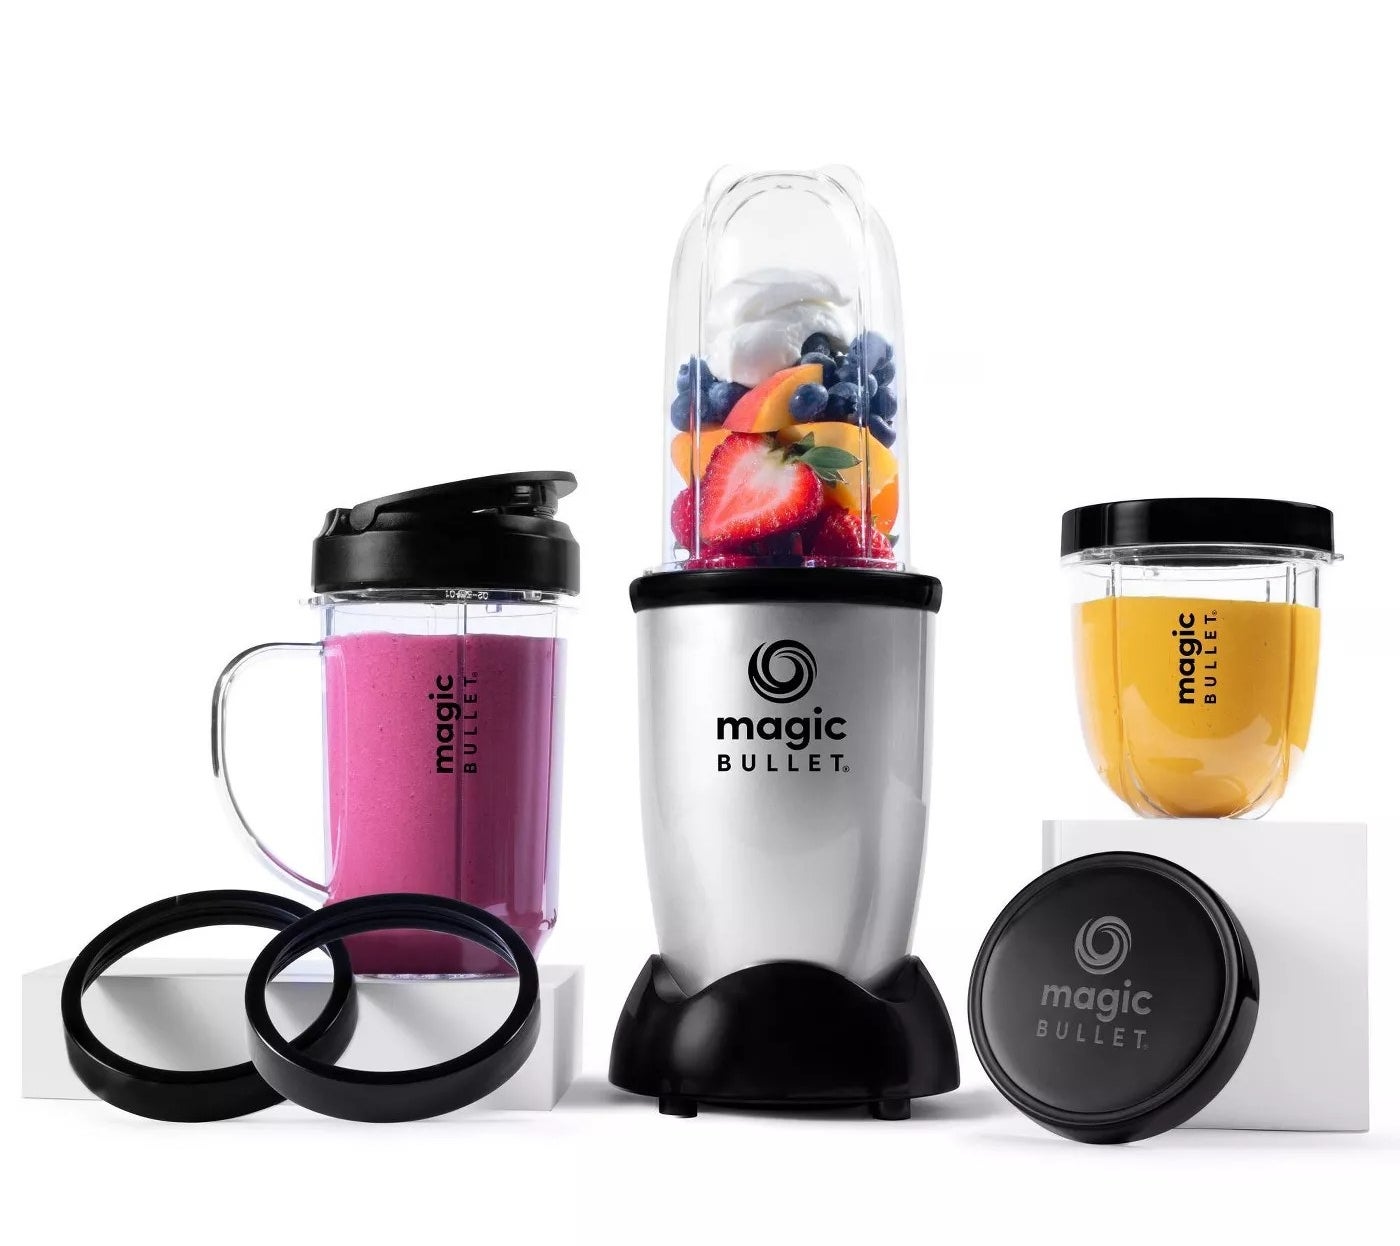 Magic Bullet Blender: Compact and Convenient Blending for On-the-Go Lifestyles